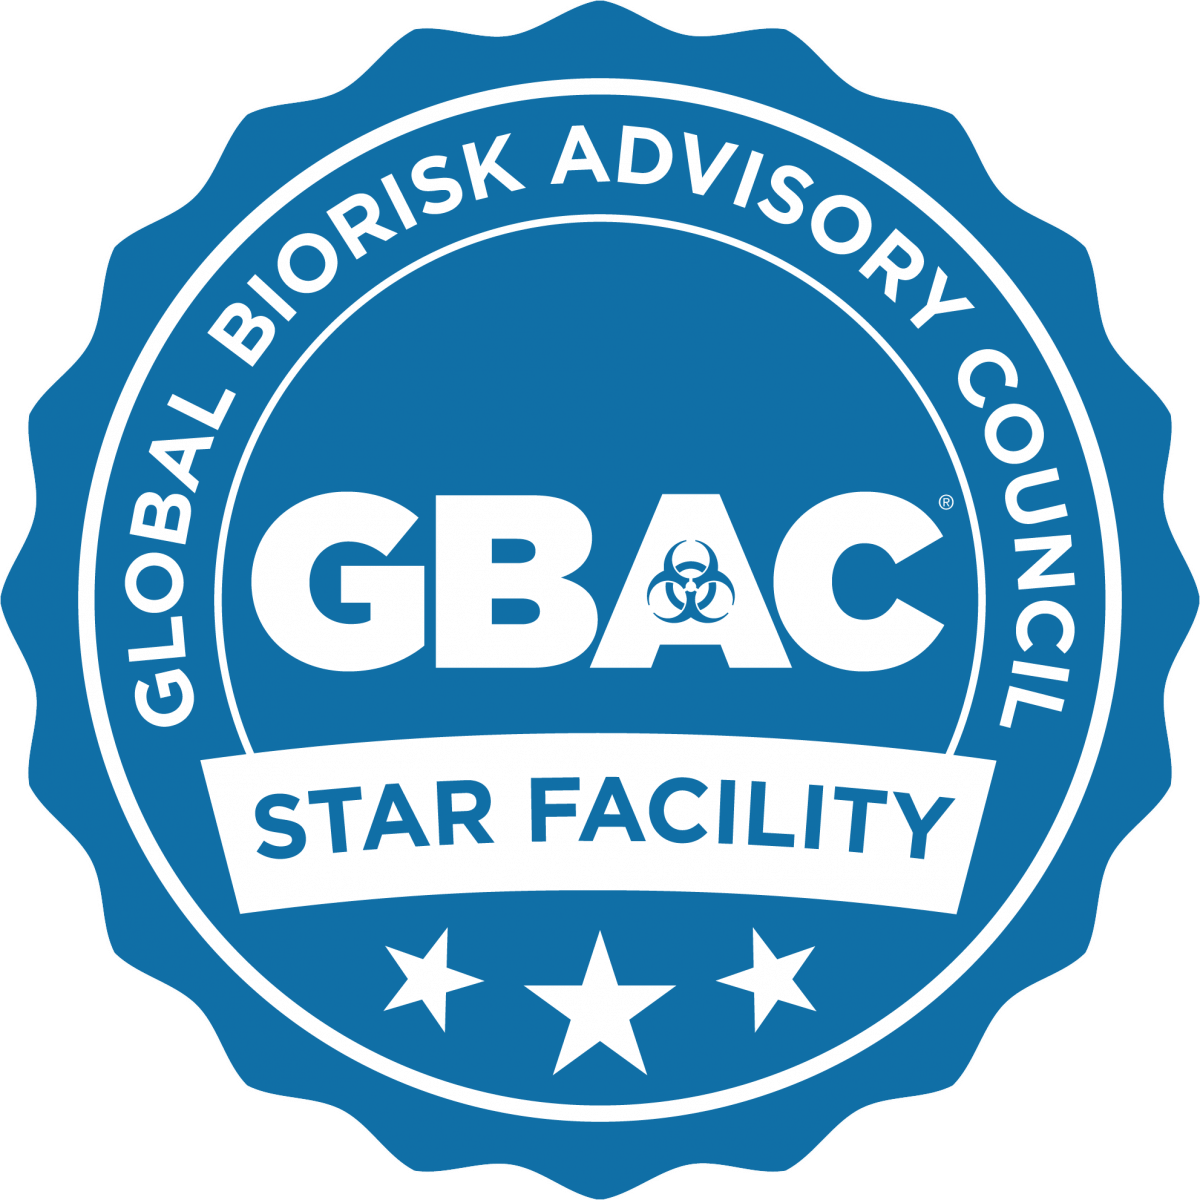 Palm Beach County is the First in United States for Its Airport, Convention Center and Convention Center Hotel to Receive GBAC Star™ Accreditation